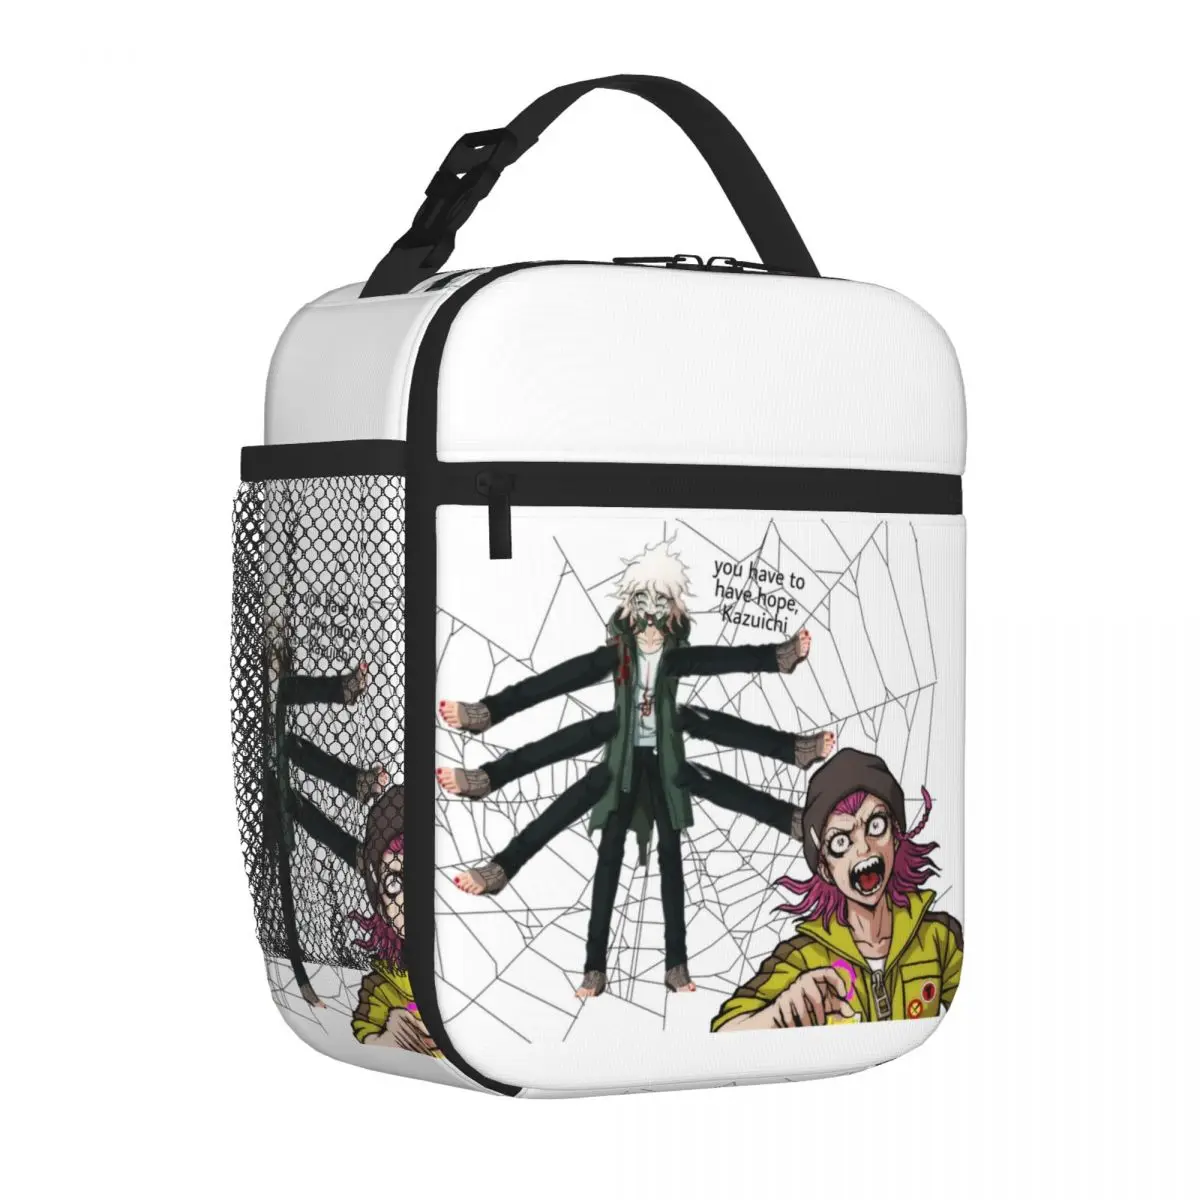 

Spider Nagito And Kazuichi Insulated Lunch Bags Thermal Bag Cooler Thermal Lunch Box Lunch Tote Bag for Woman Student School